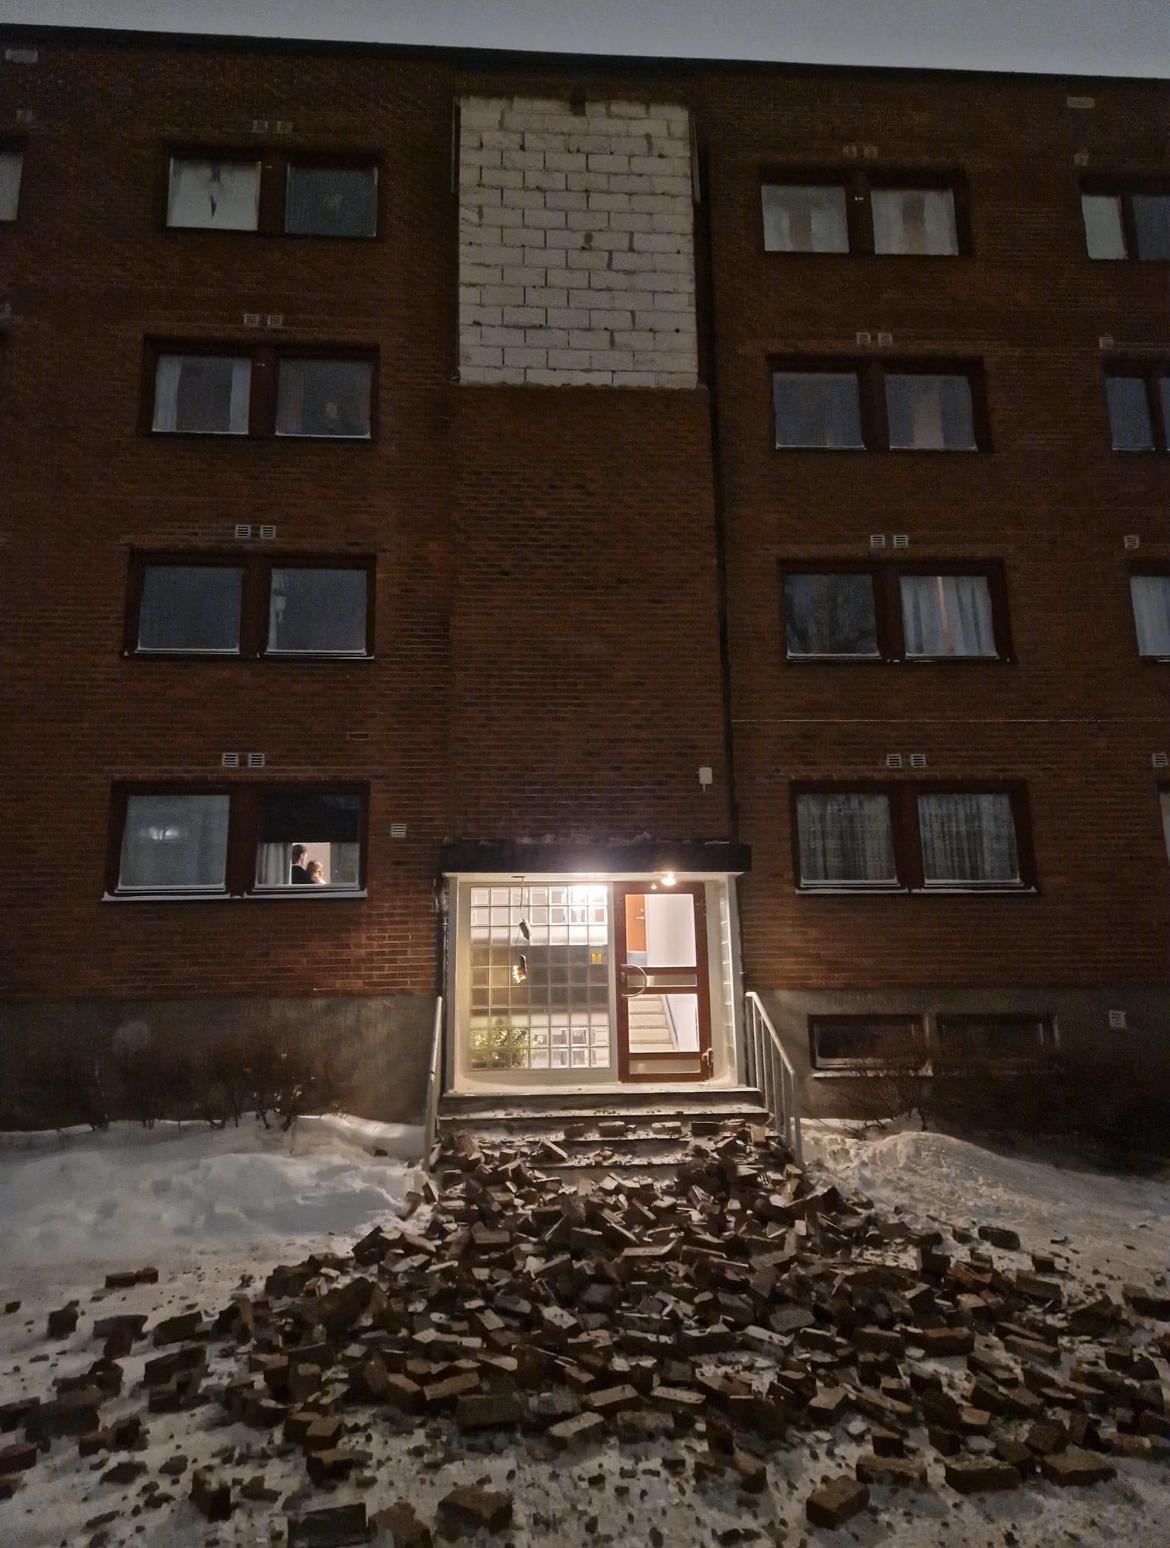 A brick collapse from an apartment in Oslo: – What is it?